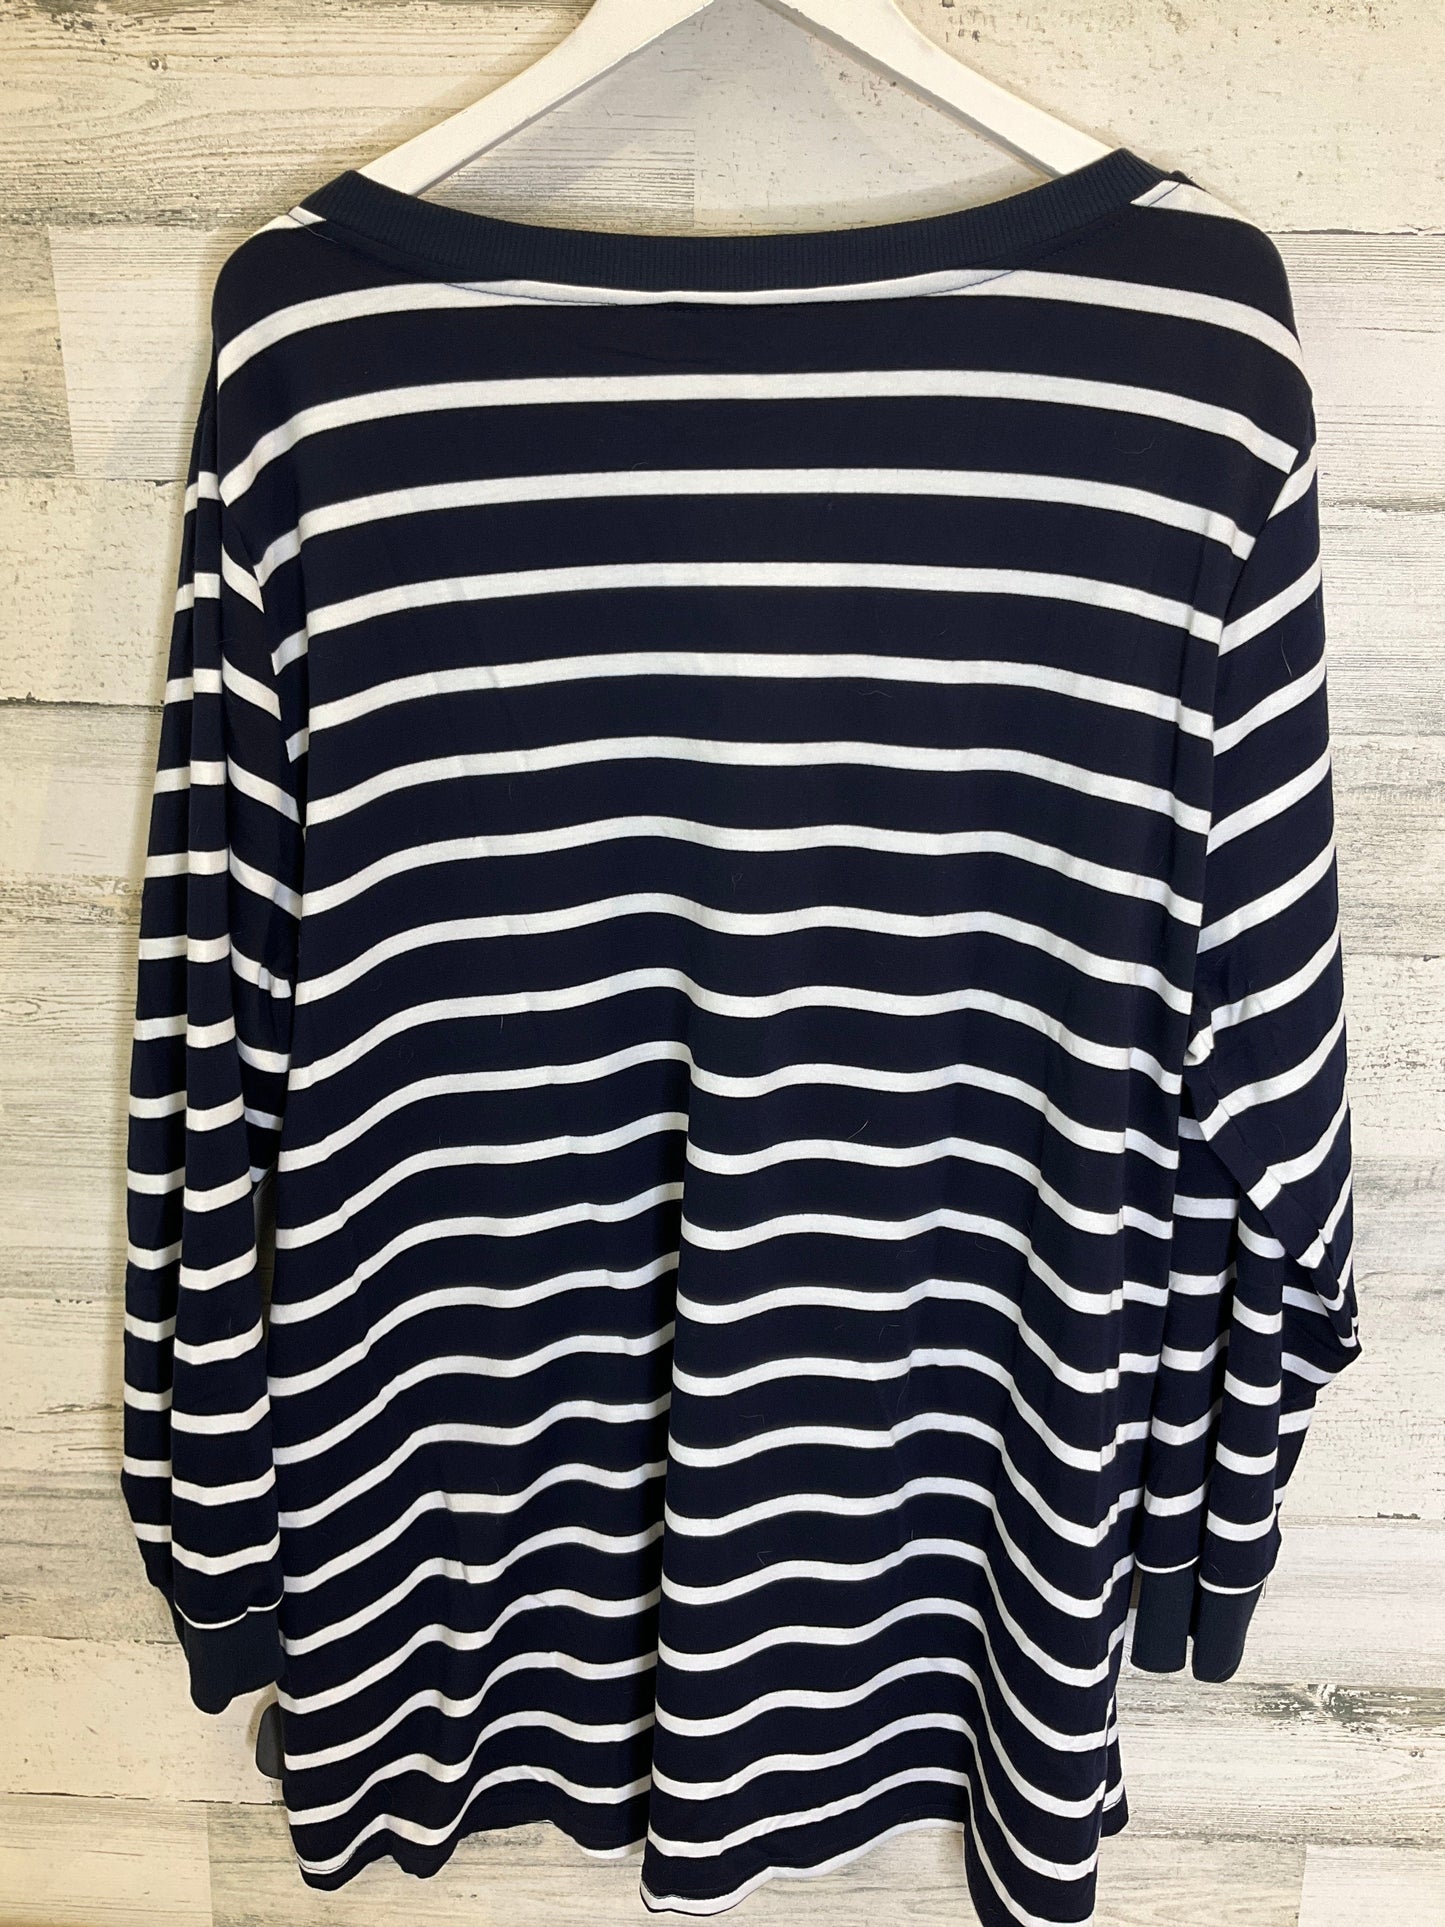 Blue & White Top Long Sleeve Clothes Mentor, Size 3x